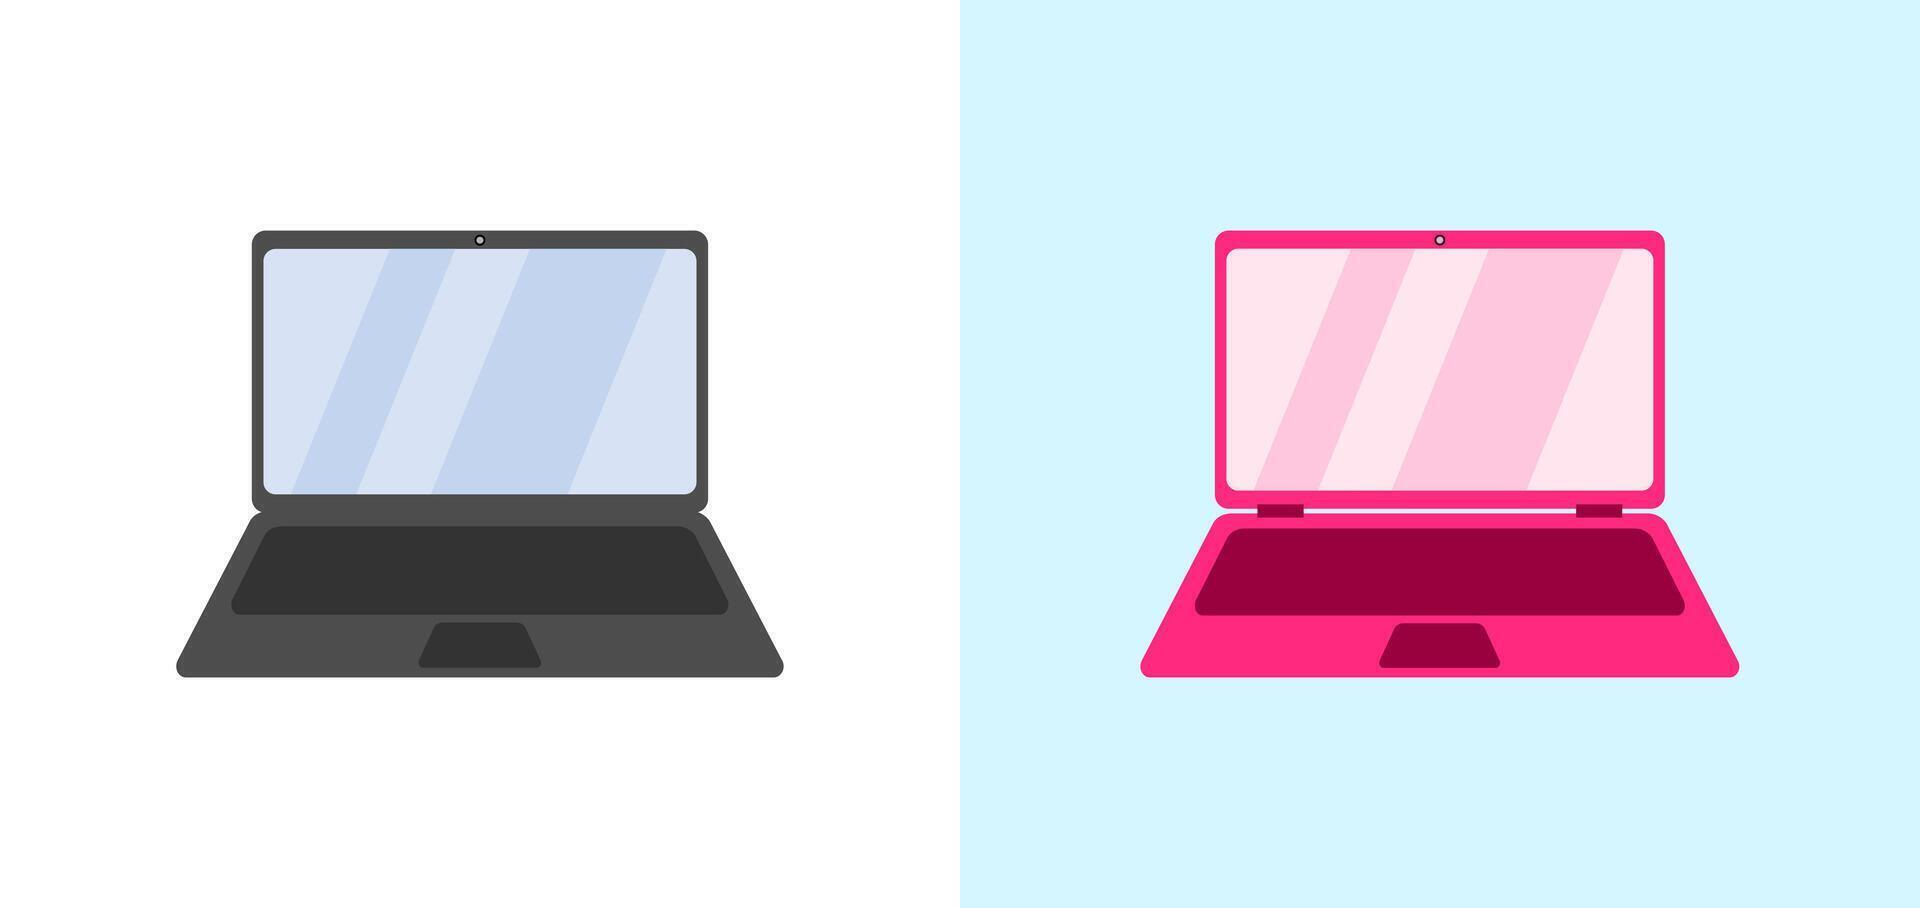 Two laptops, different colors, sizes. Suitable for tech blogs, comparison articles, product reviews, or technology related designs and presentations. vector